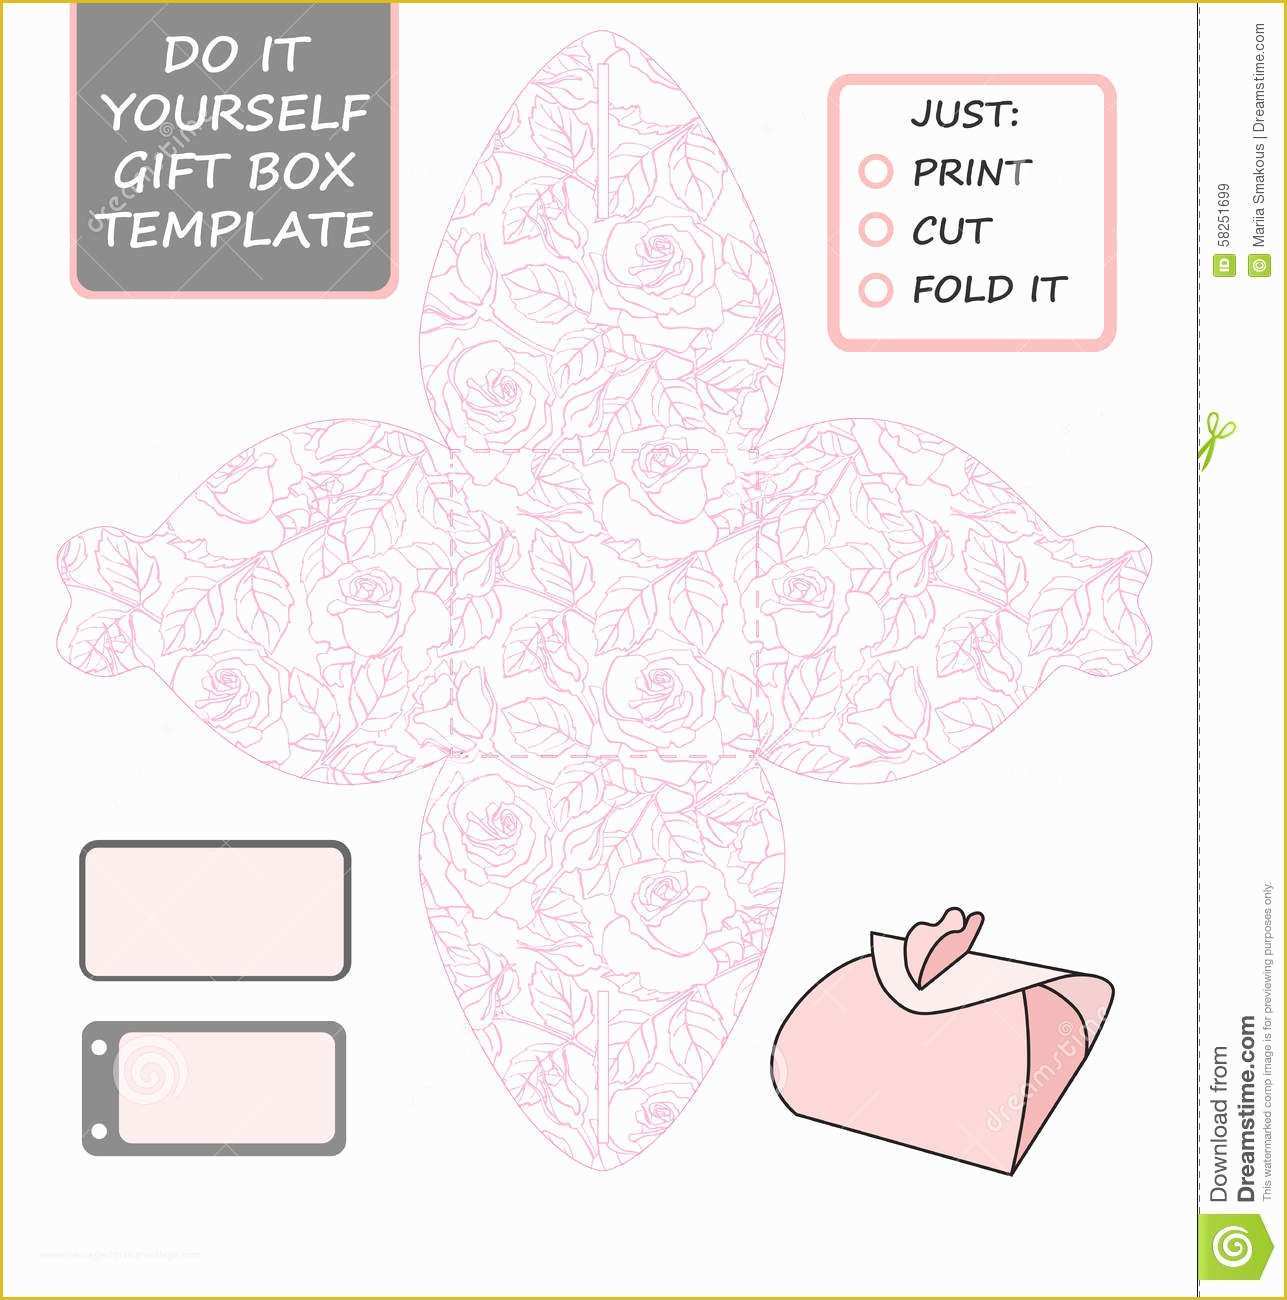 Free Die Cut Templates Of Favor Gift Box Die Cut Box Template with Rose Pattern